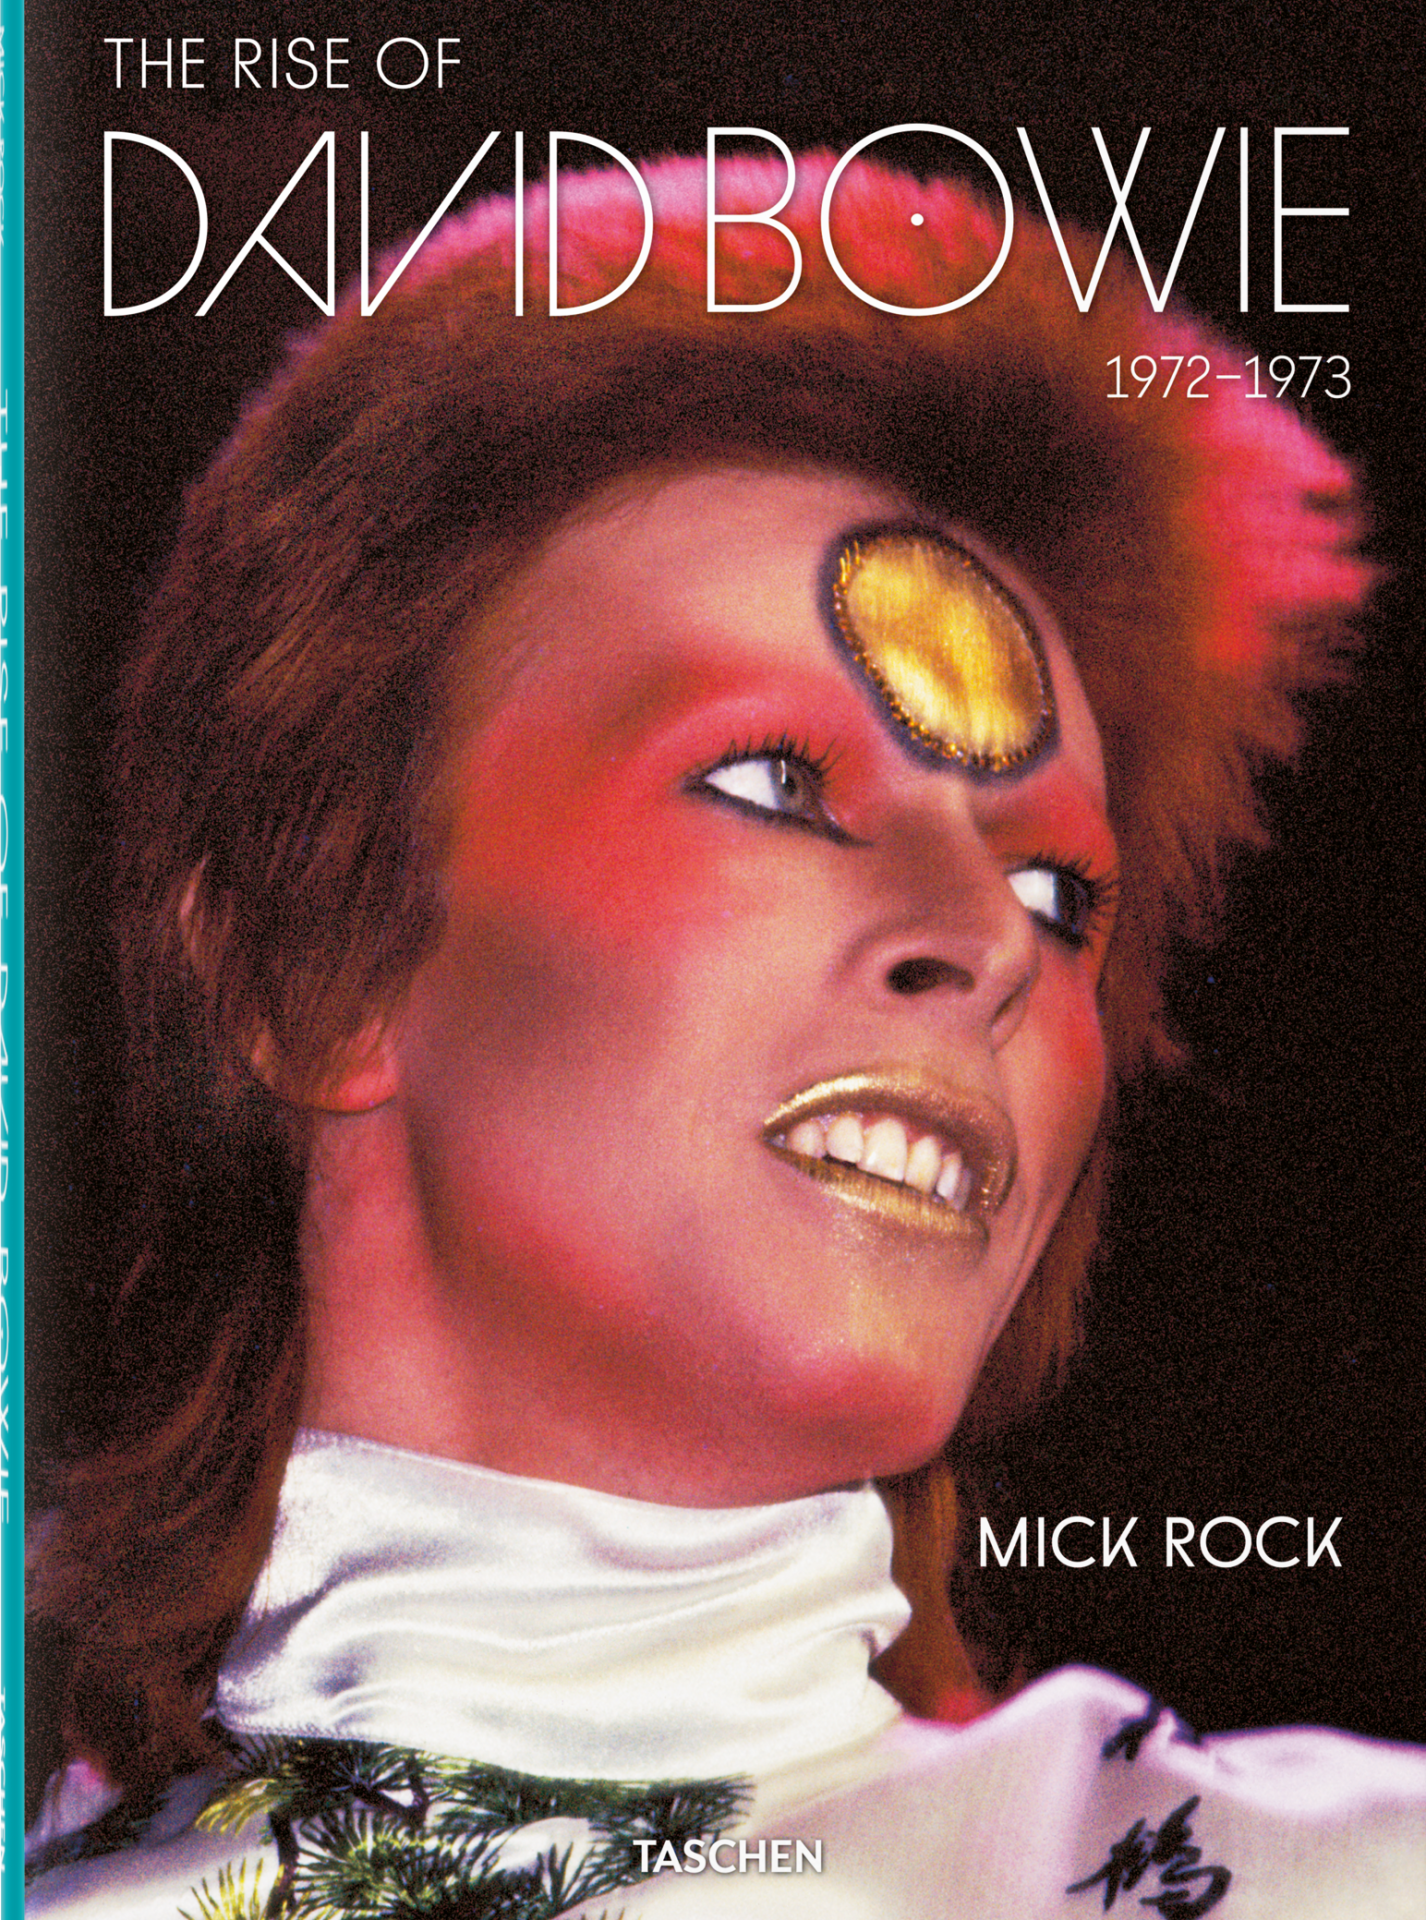 Mick Rock: The Rise of David Bowie - 1972-1973